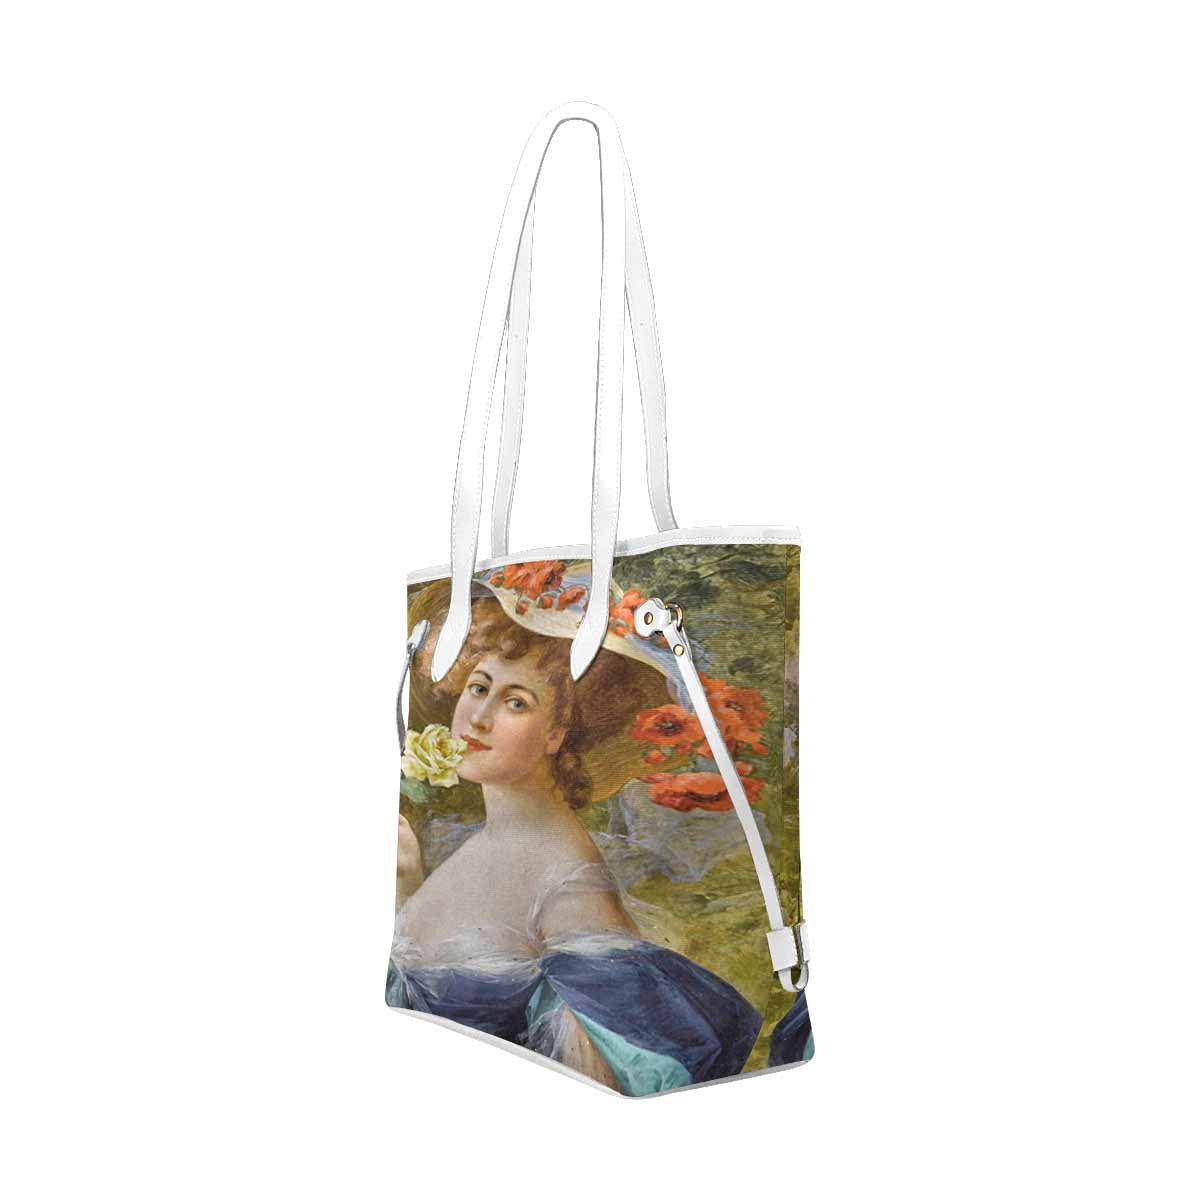 Victorian Lady Design Handbag, Model 1695361, Woman With Yellow Rose At Mouth, WHITE TRIM